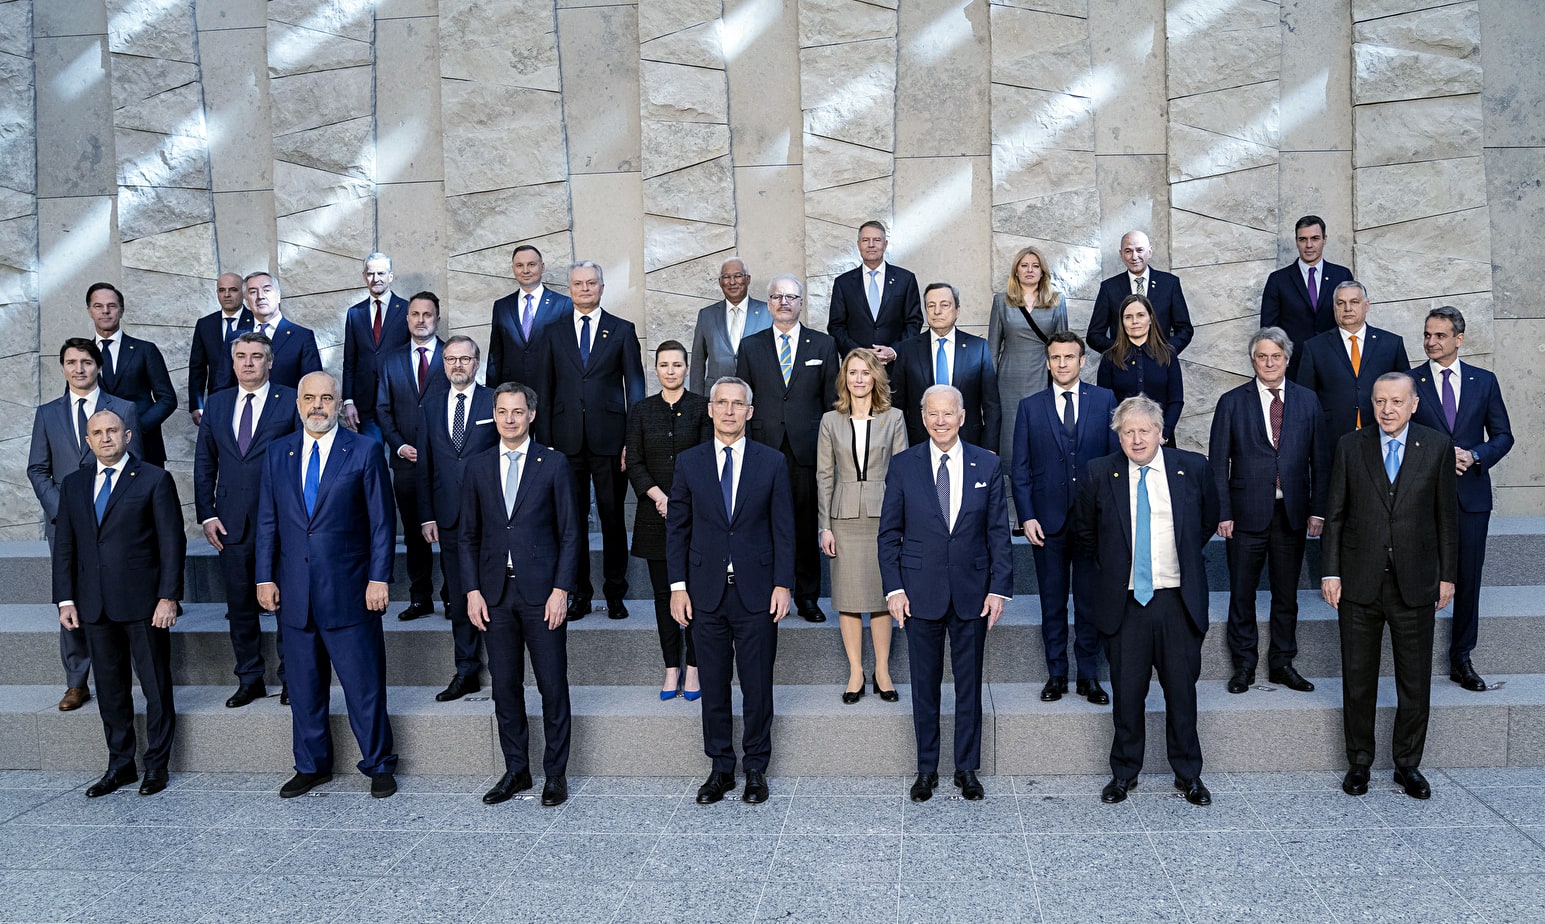 NATO, EU leaders pose for a group picture